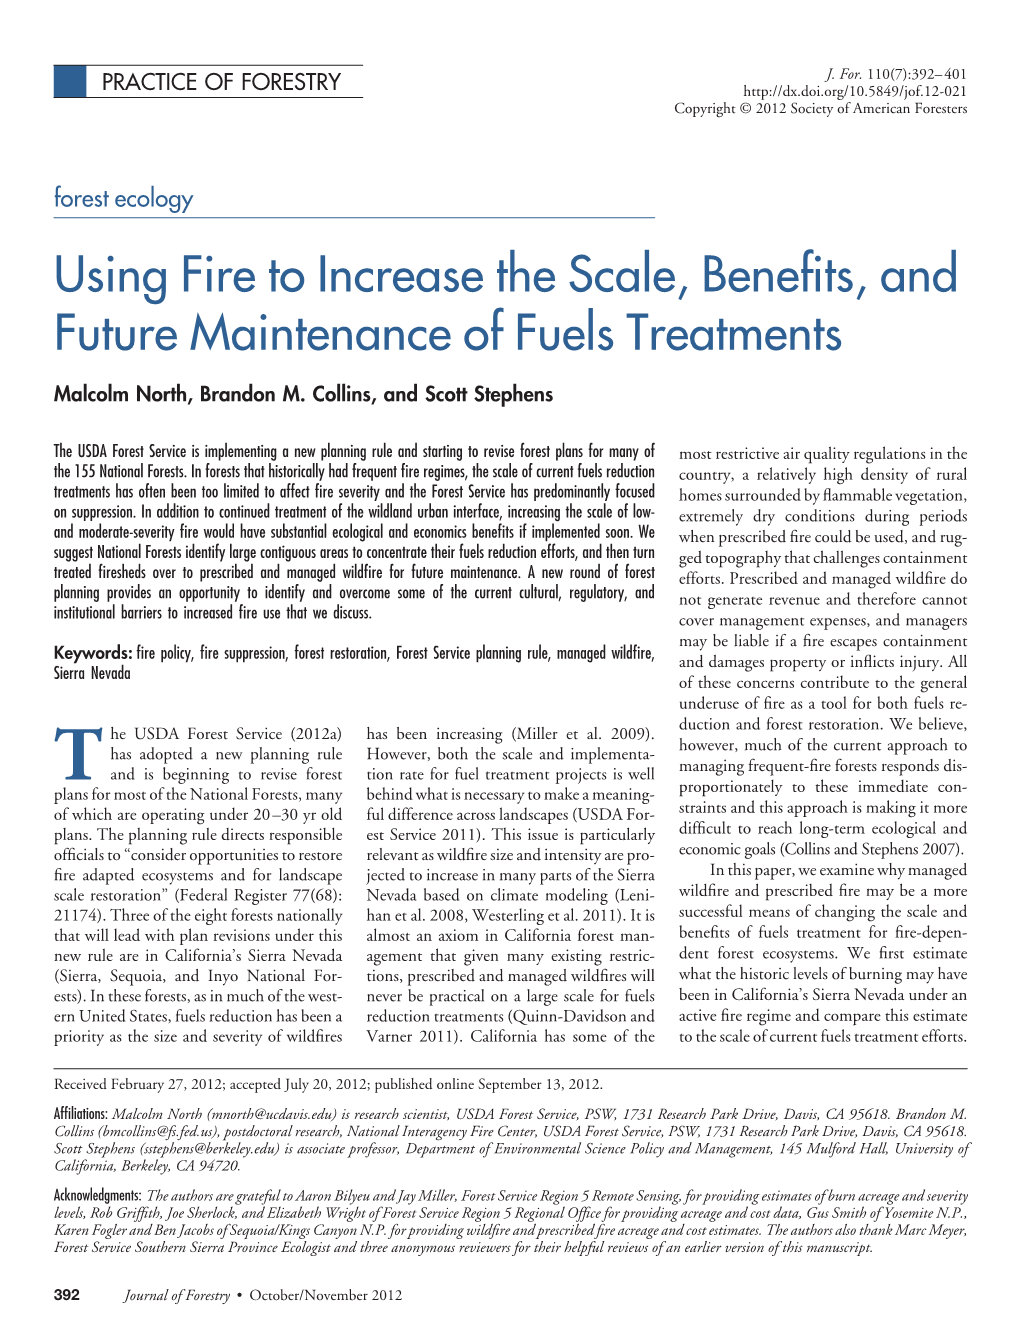 Using Fire to Increase the Scale, Benefits, and Future Maintenance Of